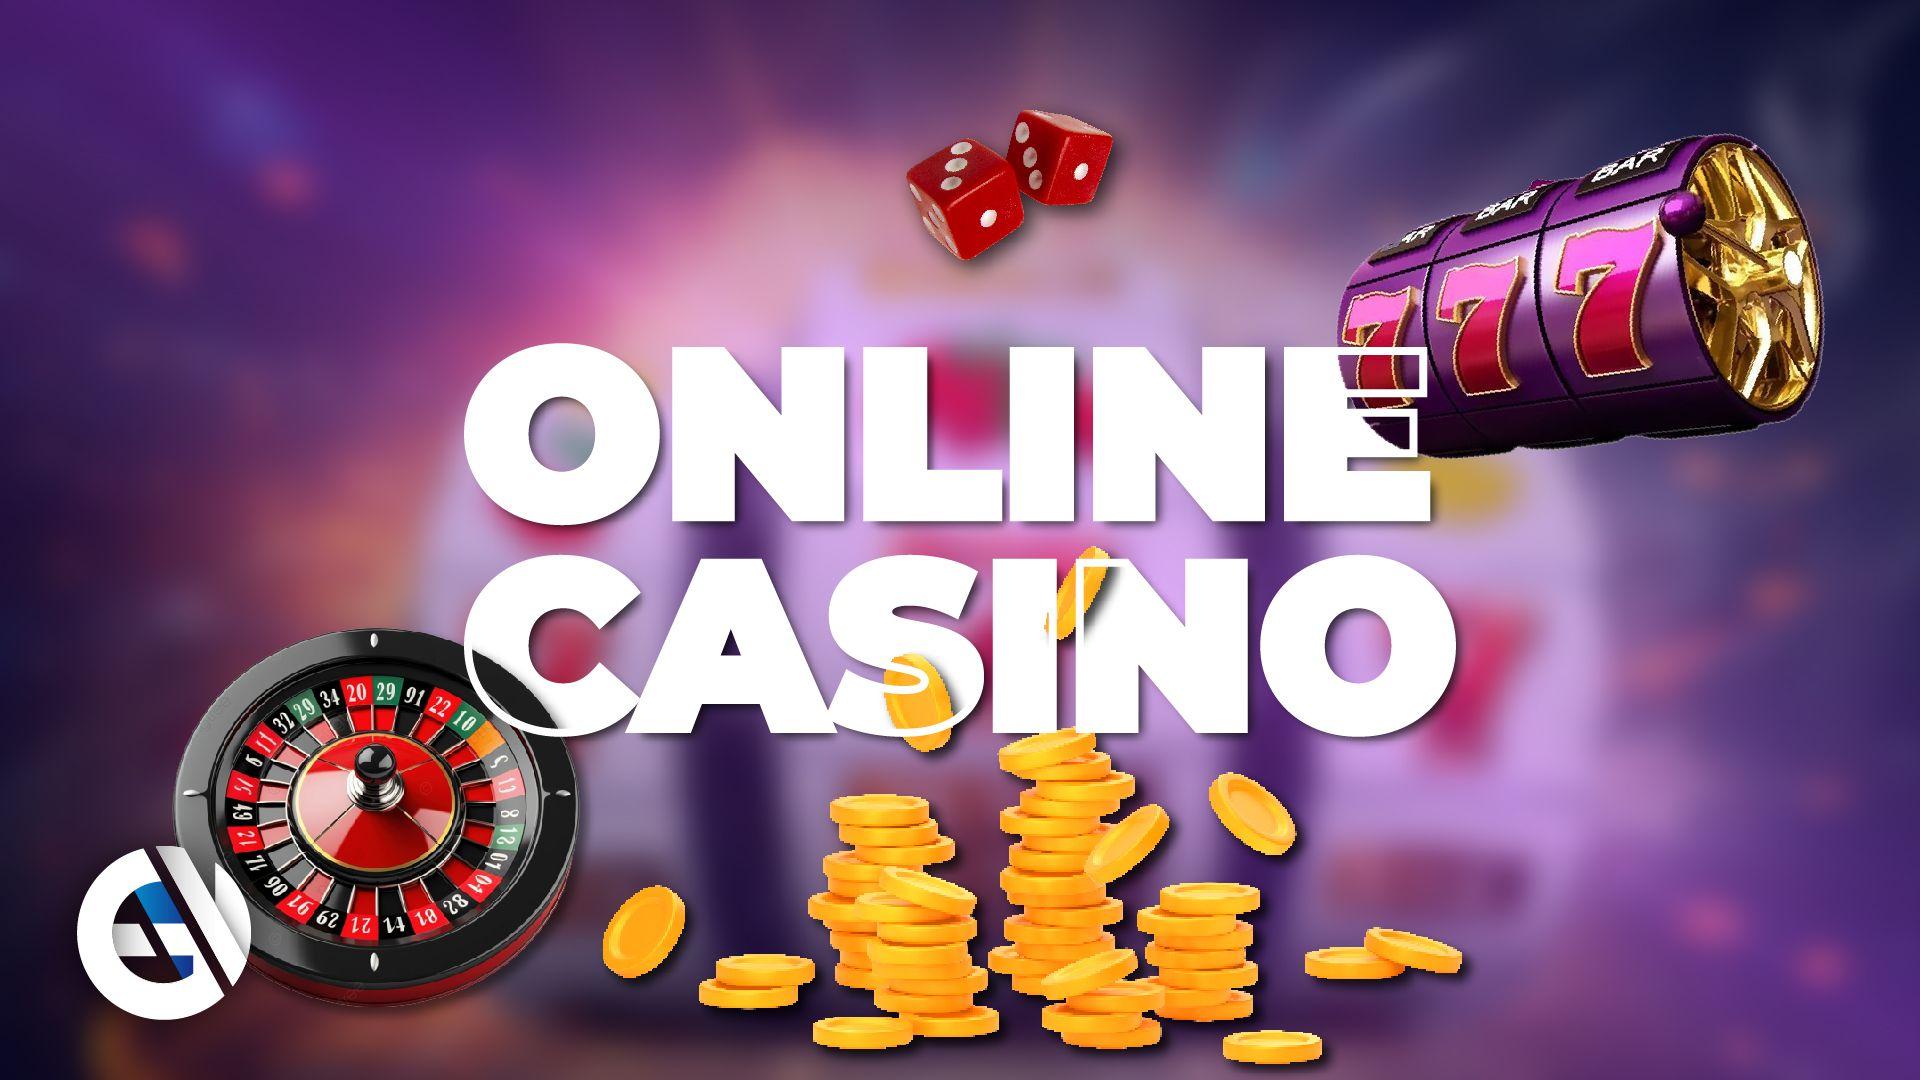 The most popular and loved online casino games in Finland